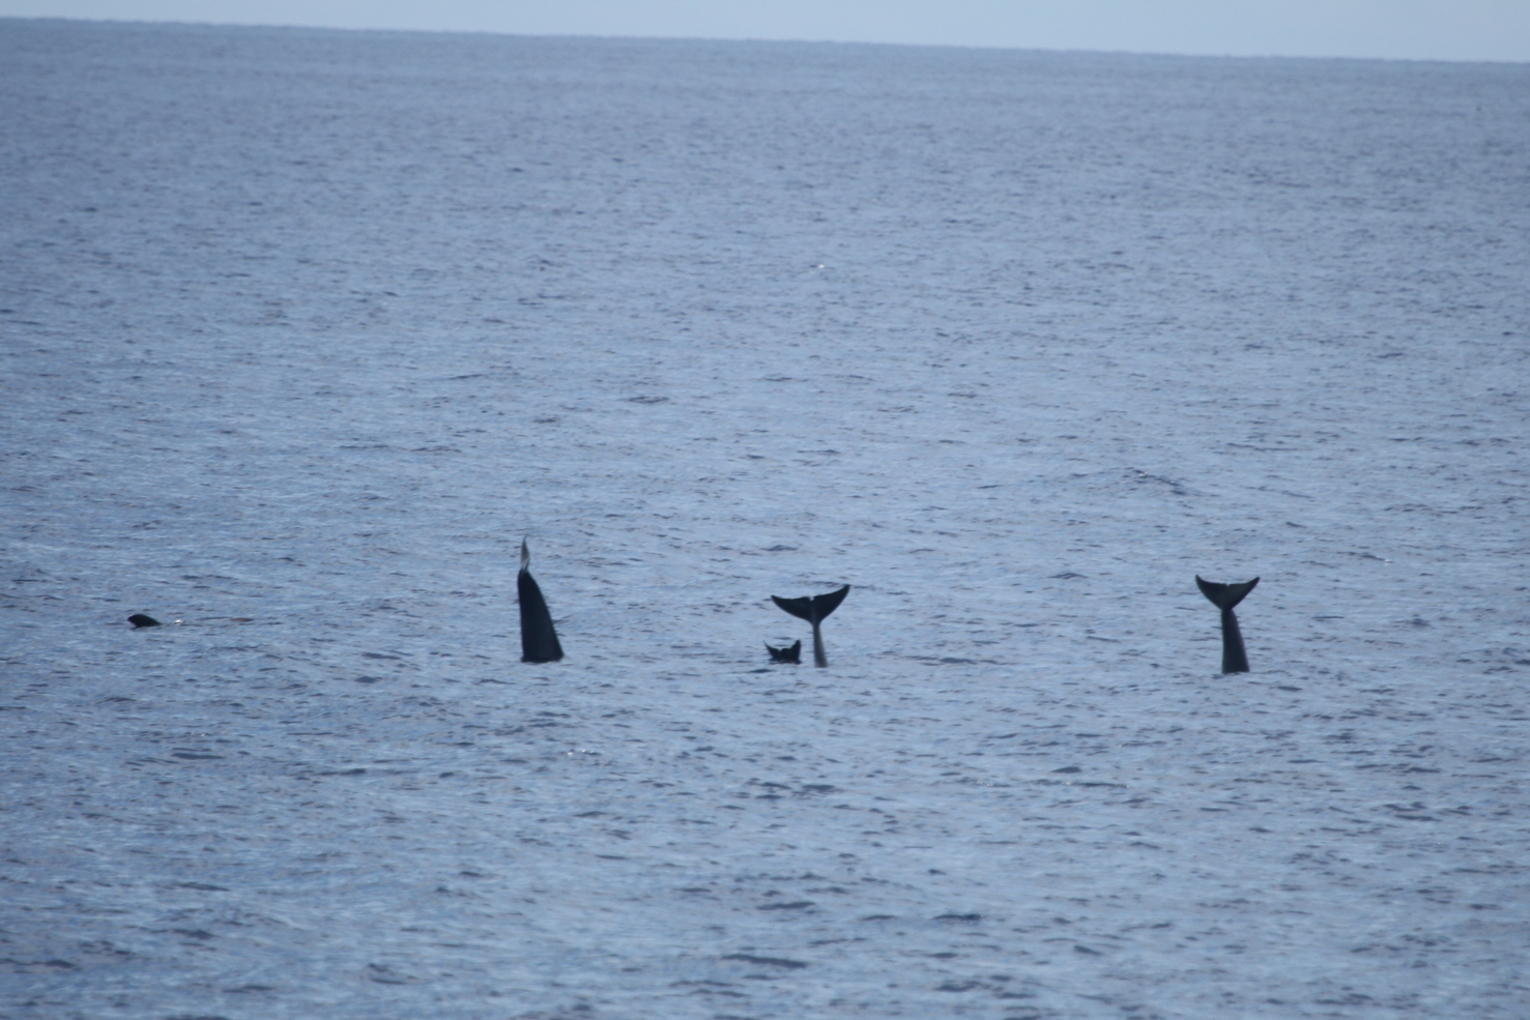 Risso’s dolphins doing their characteristic “headstands”